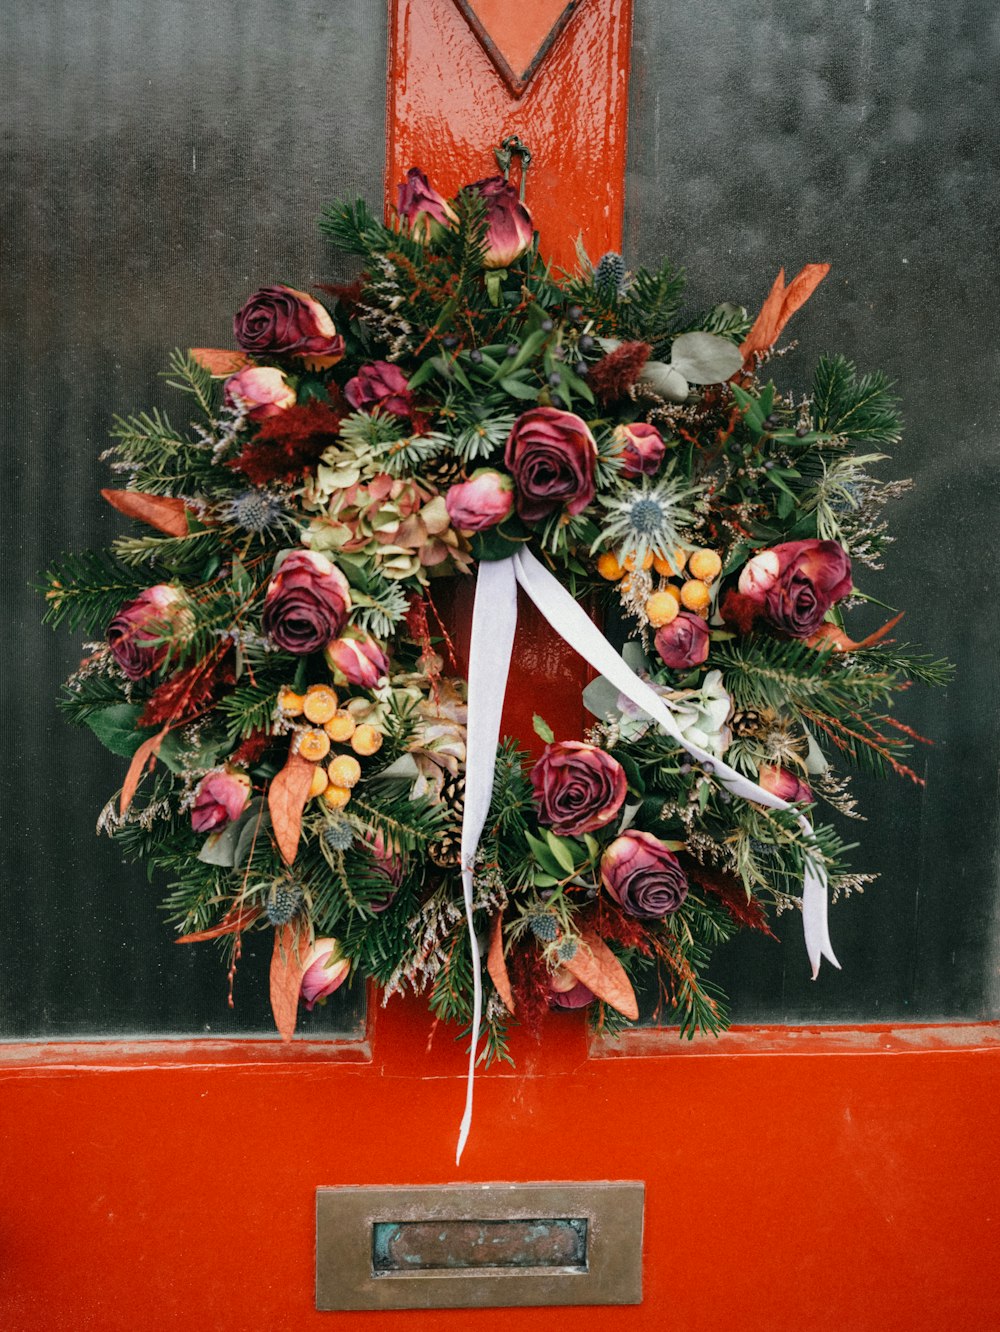 a wreath on the front door of a house